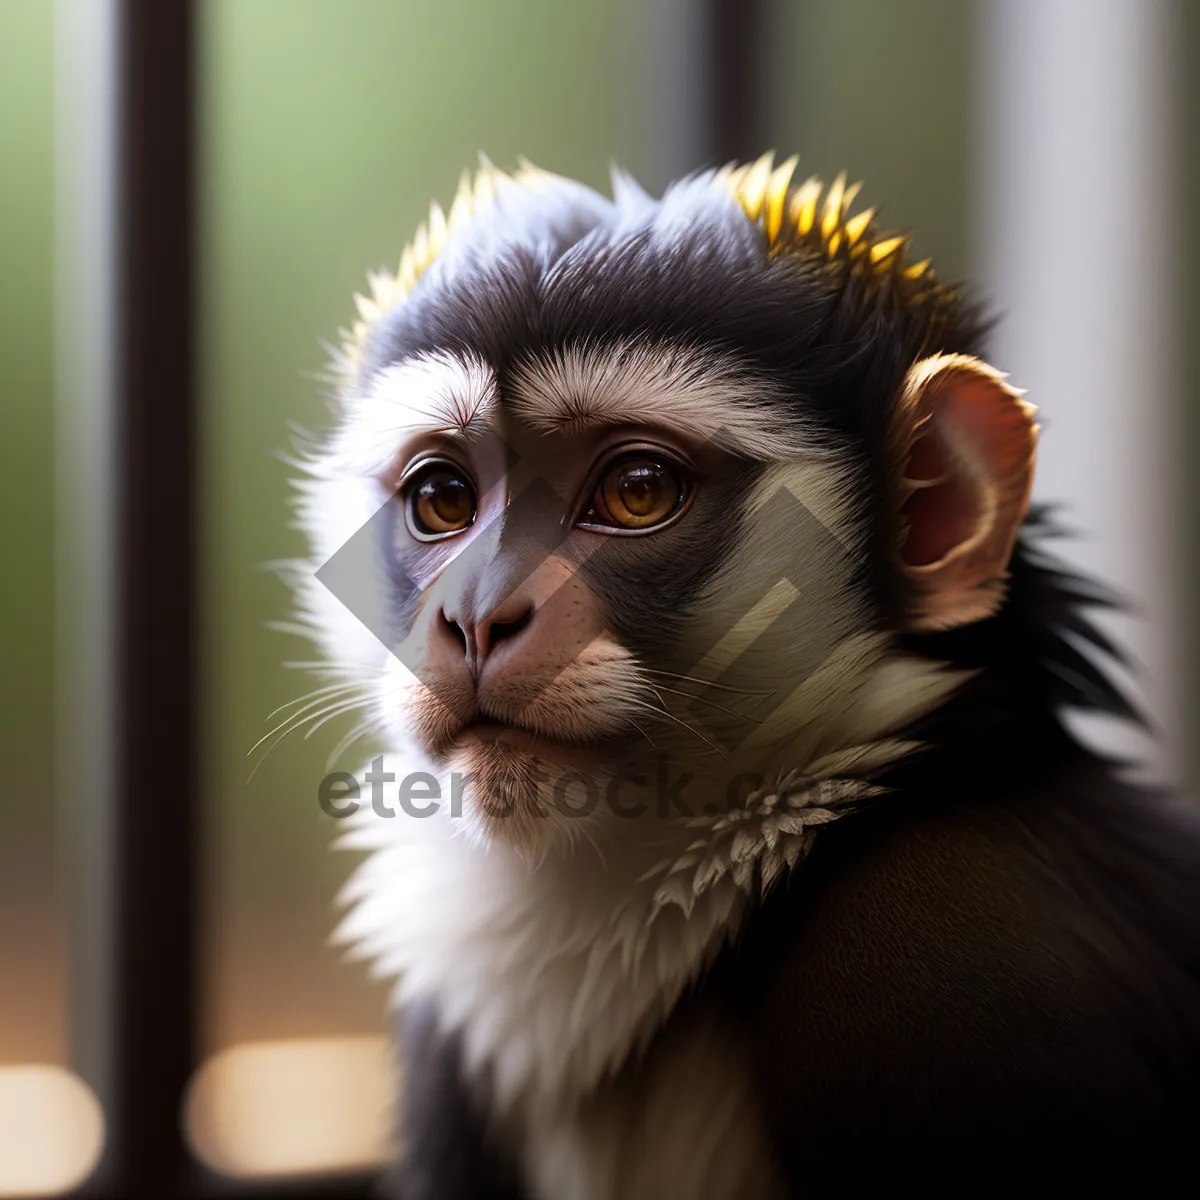 Picture of Cute primate with expressive eyes - Wildlife Portrait